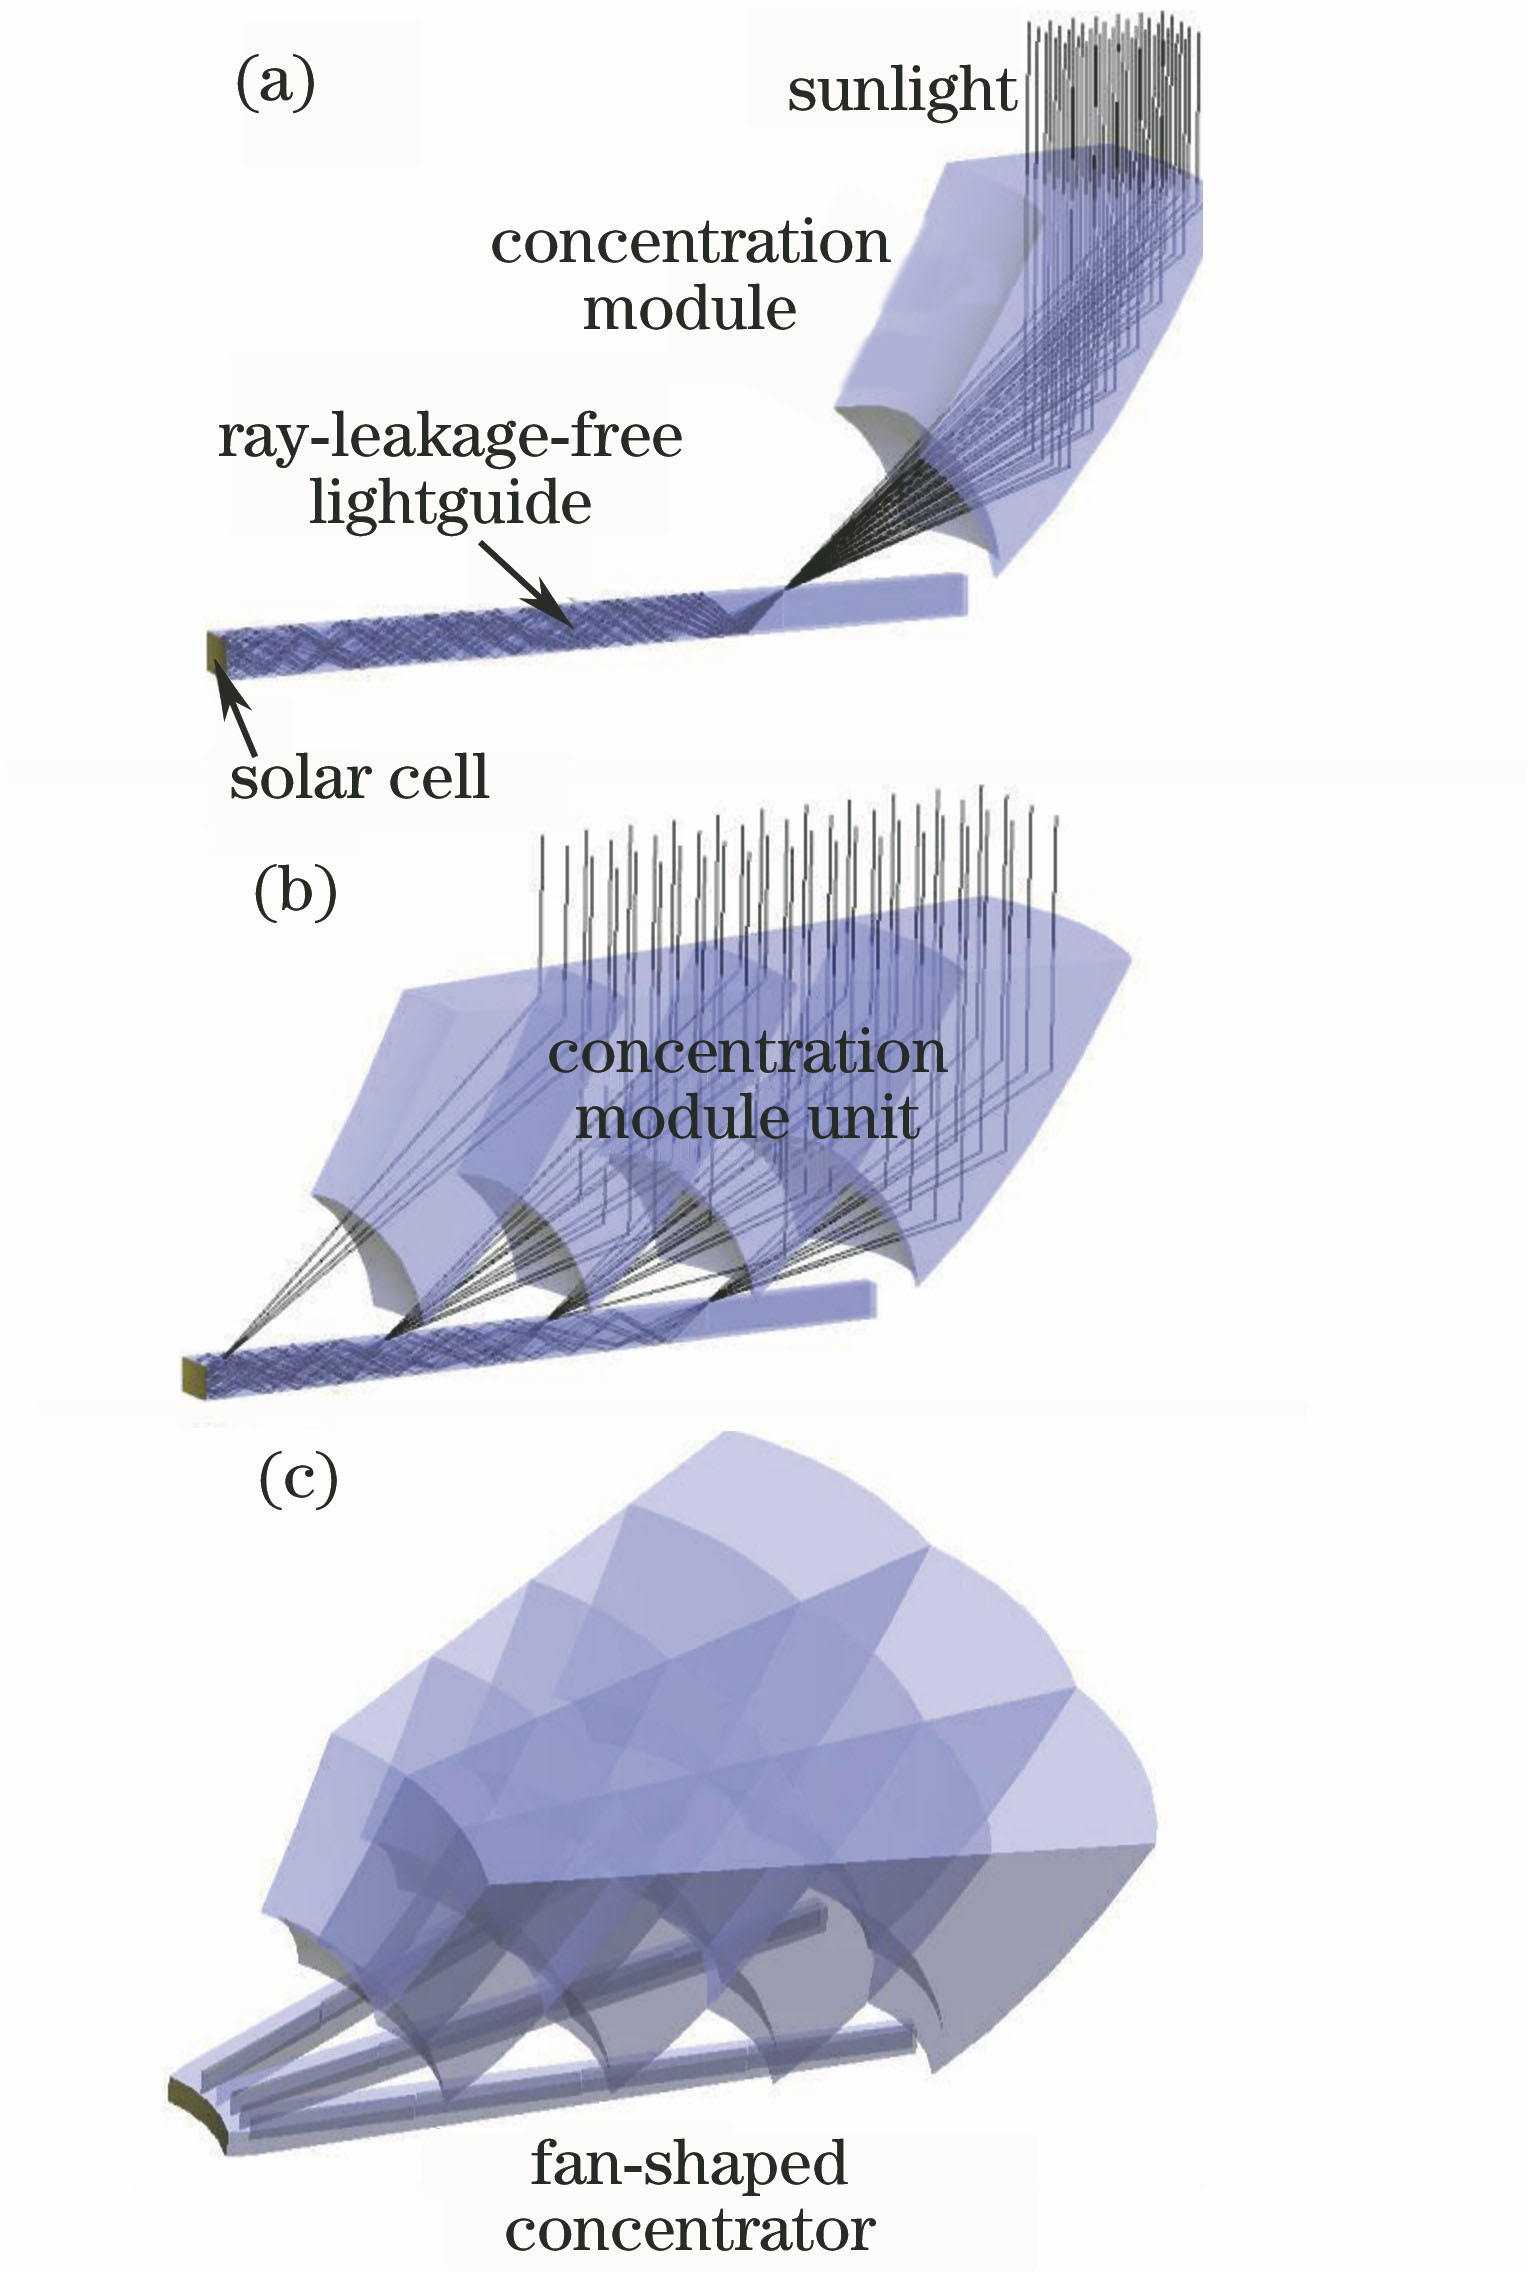 (a) Ray tracing of a concentration module; (b) ray tracing concentration modules unit; (c) schematic of fan-shaped ray-leakage-free solar concentrator structure